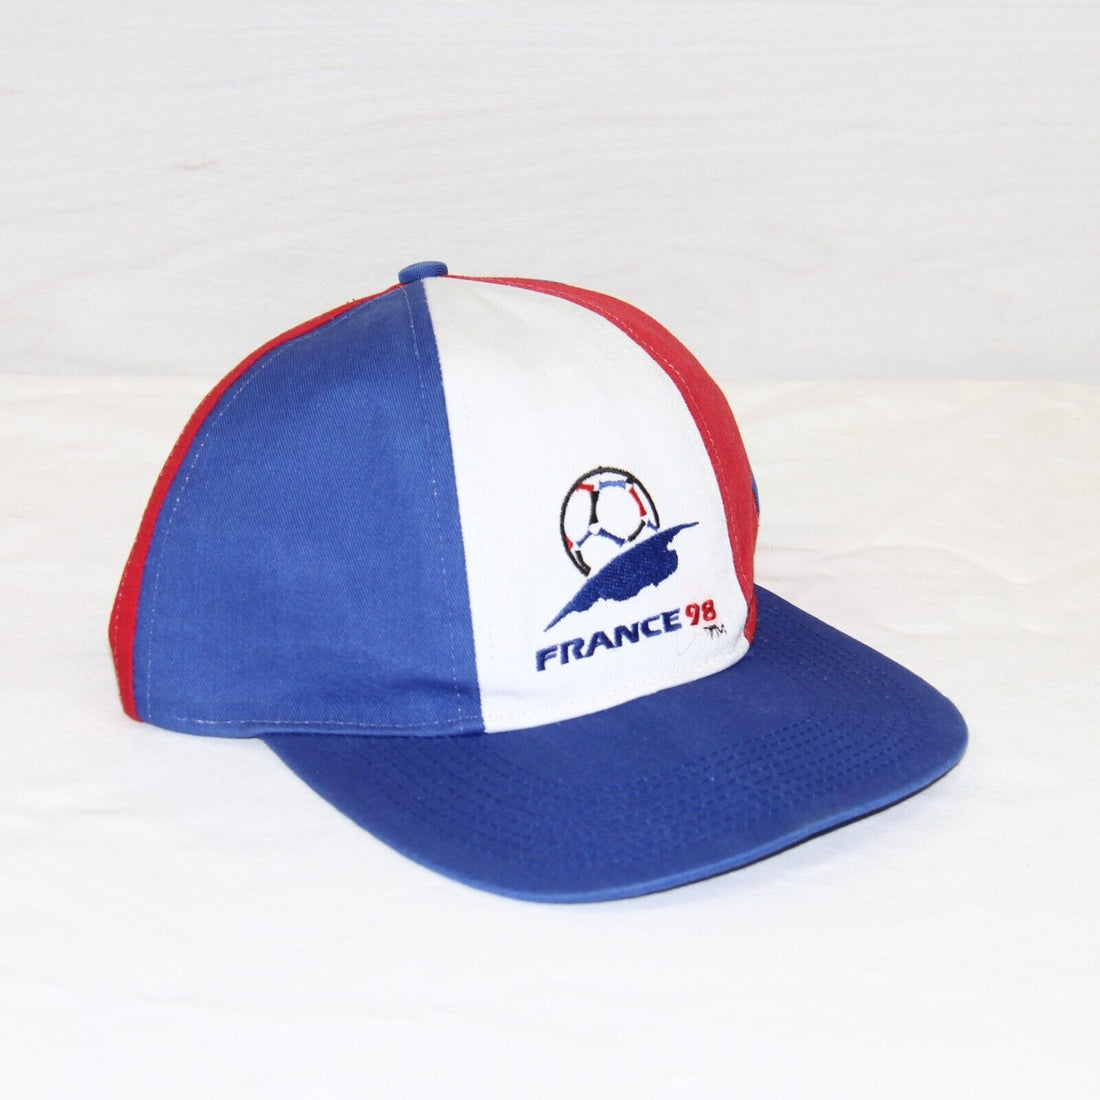 Vintage France World Cup Snapback Hat Cap OSFA 1998 90s FIFA Embroidered Soccer